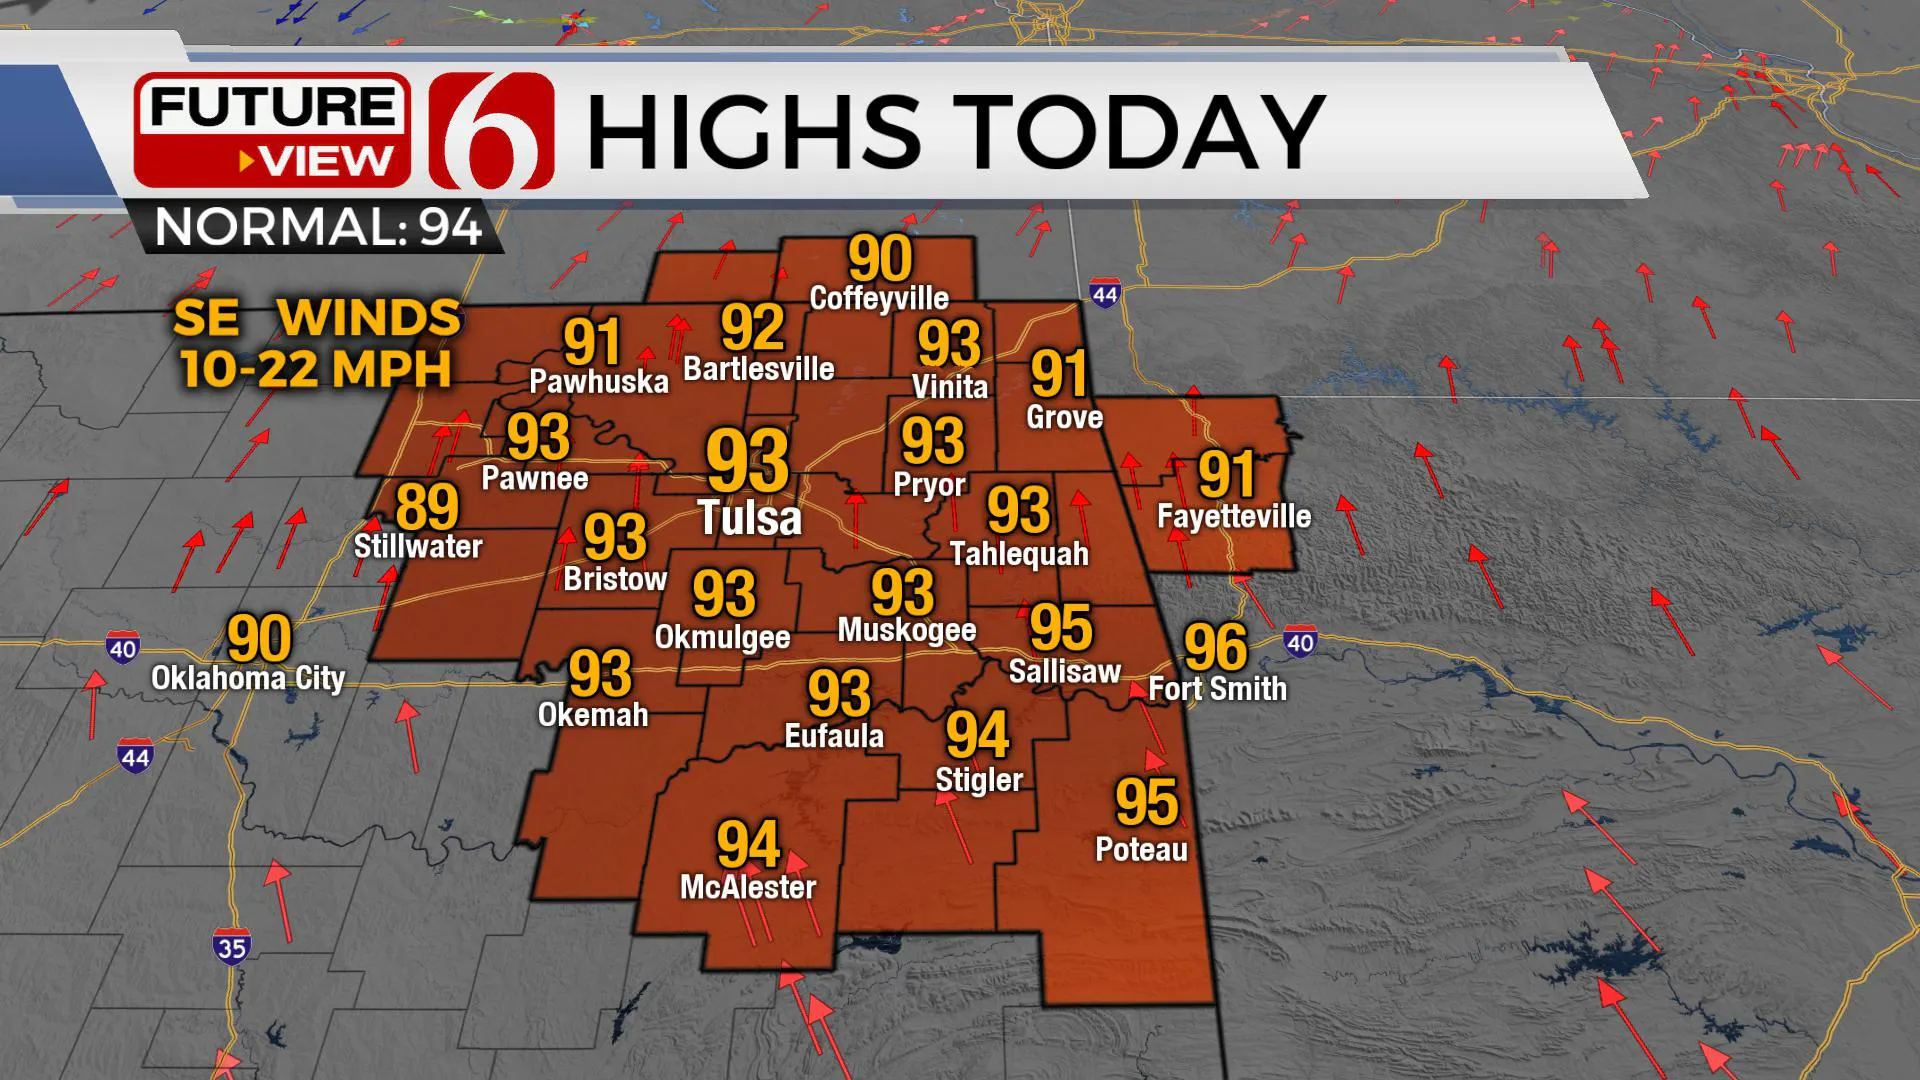 Highs For Tuesday